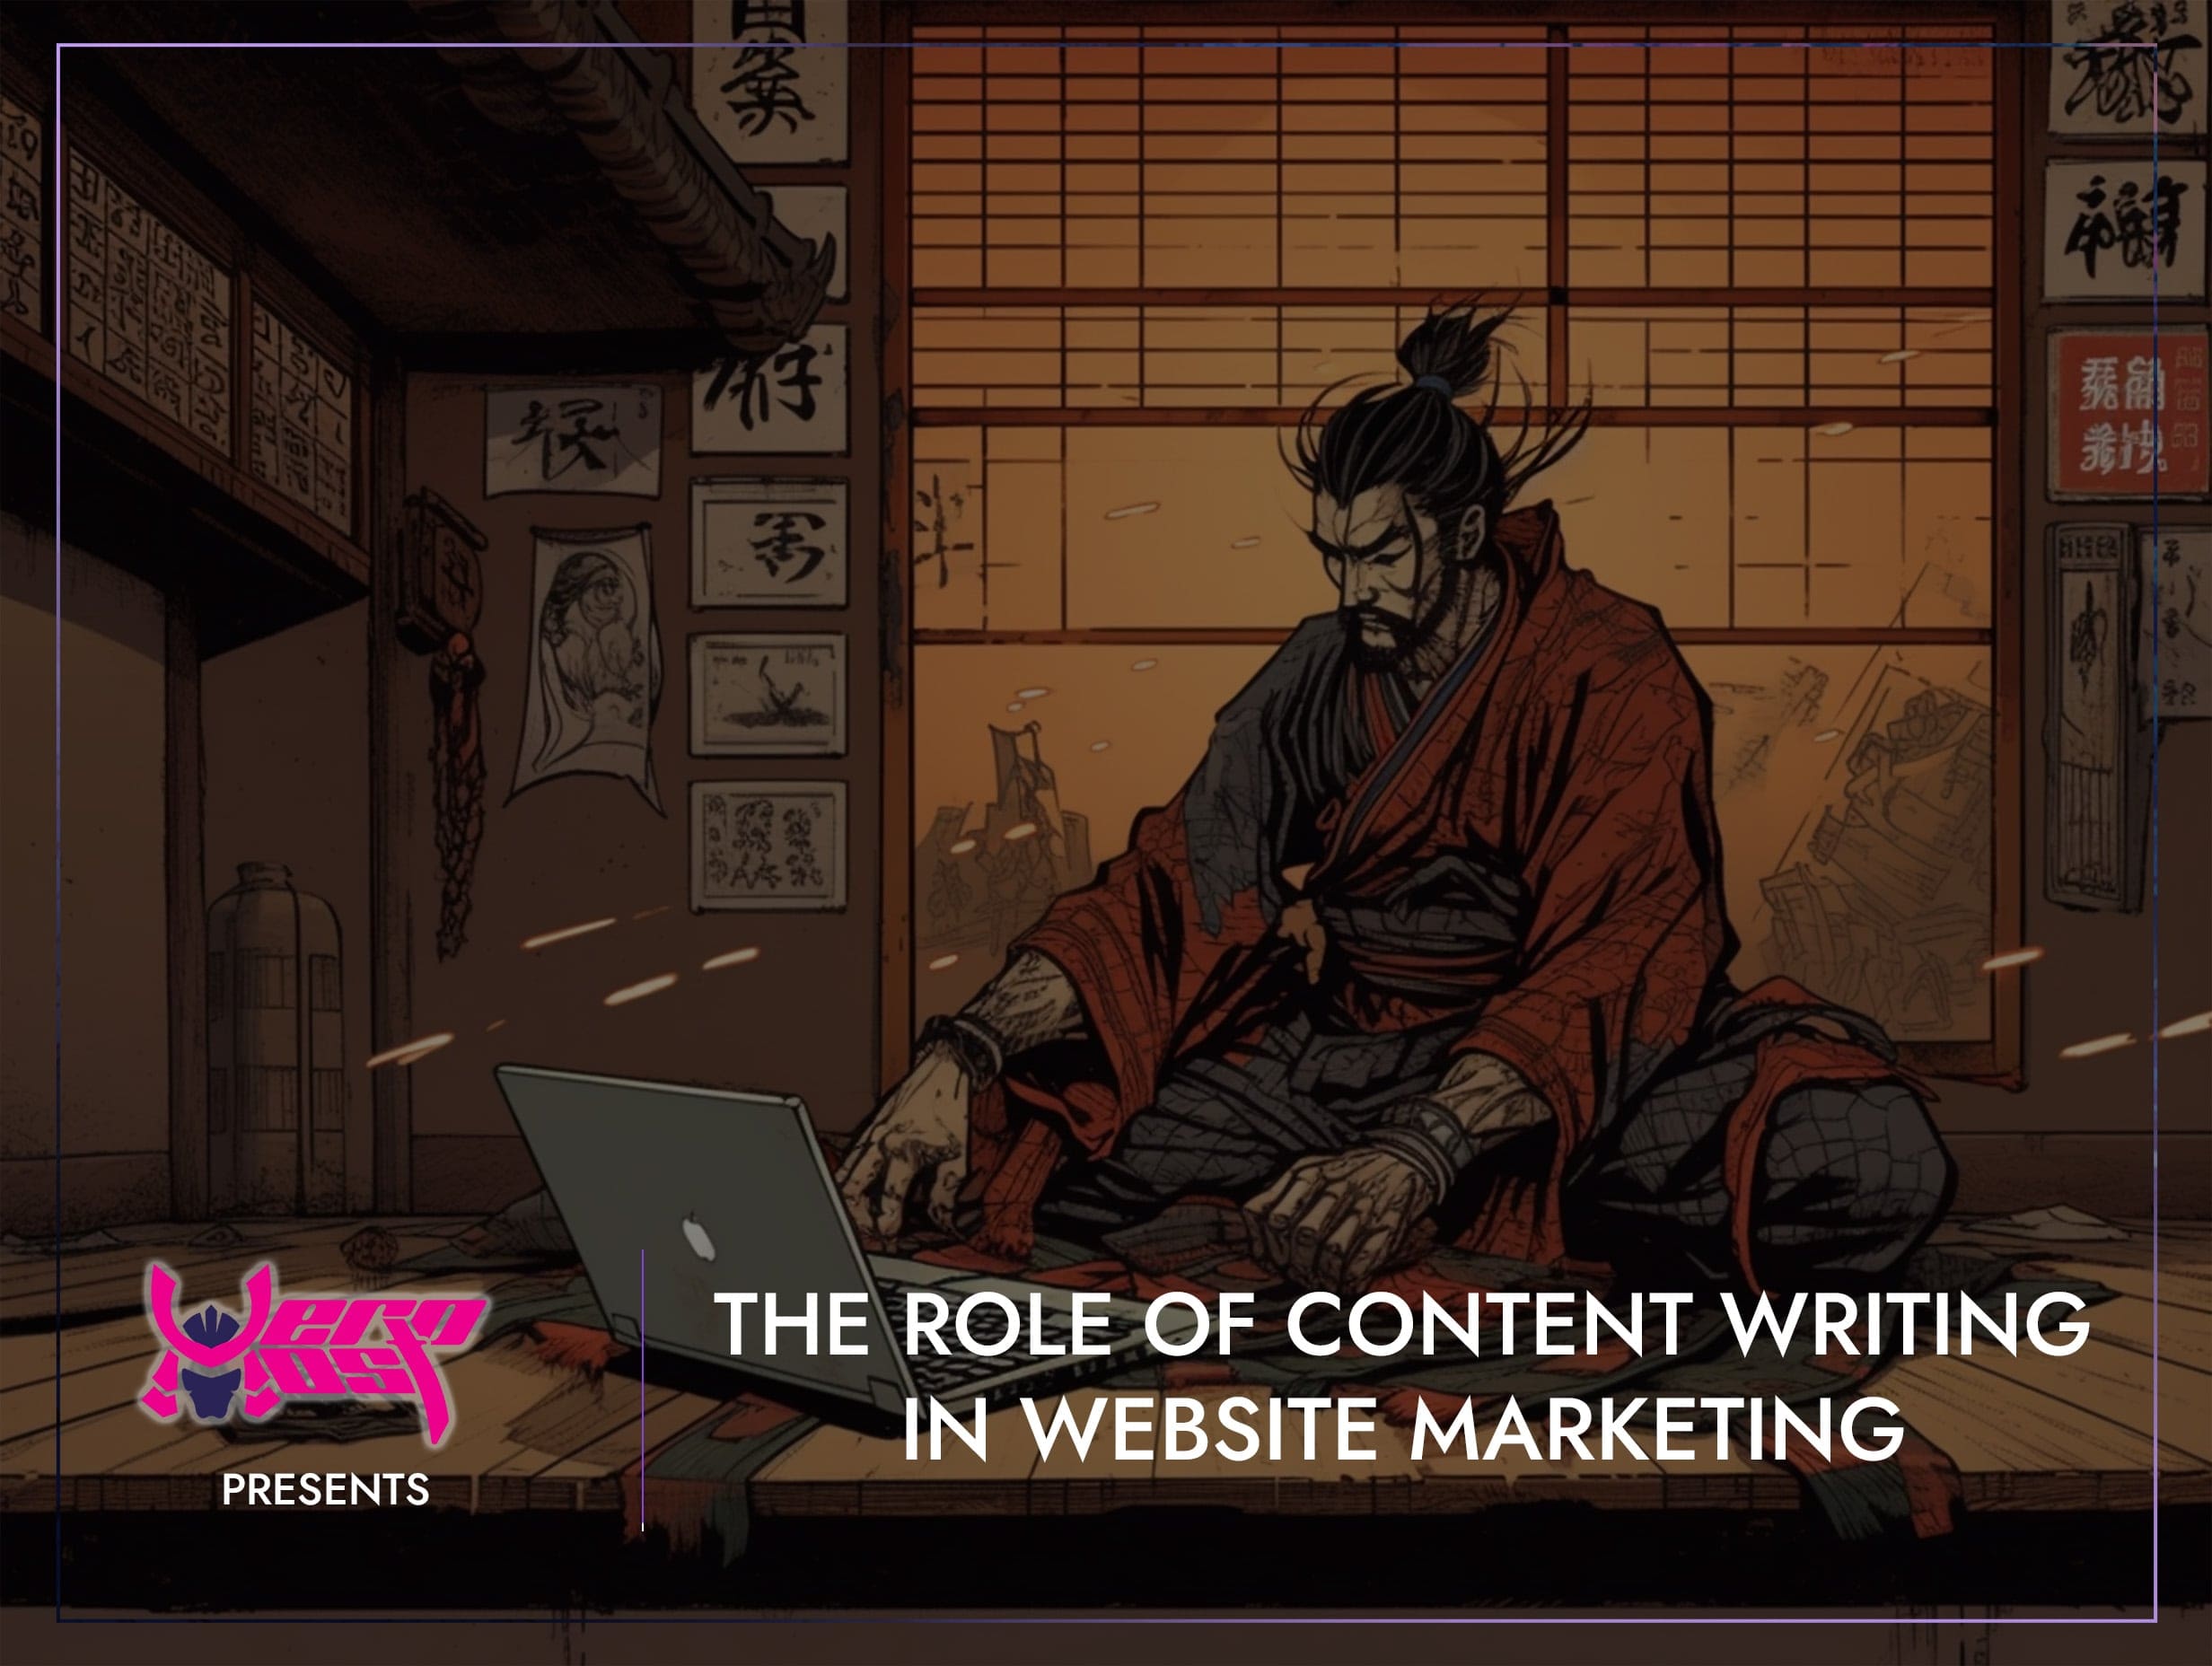 The Role of Content Writing in Website Marketing